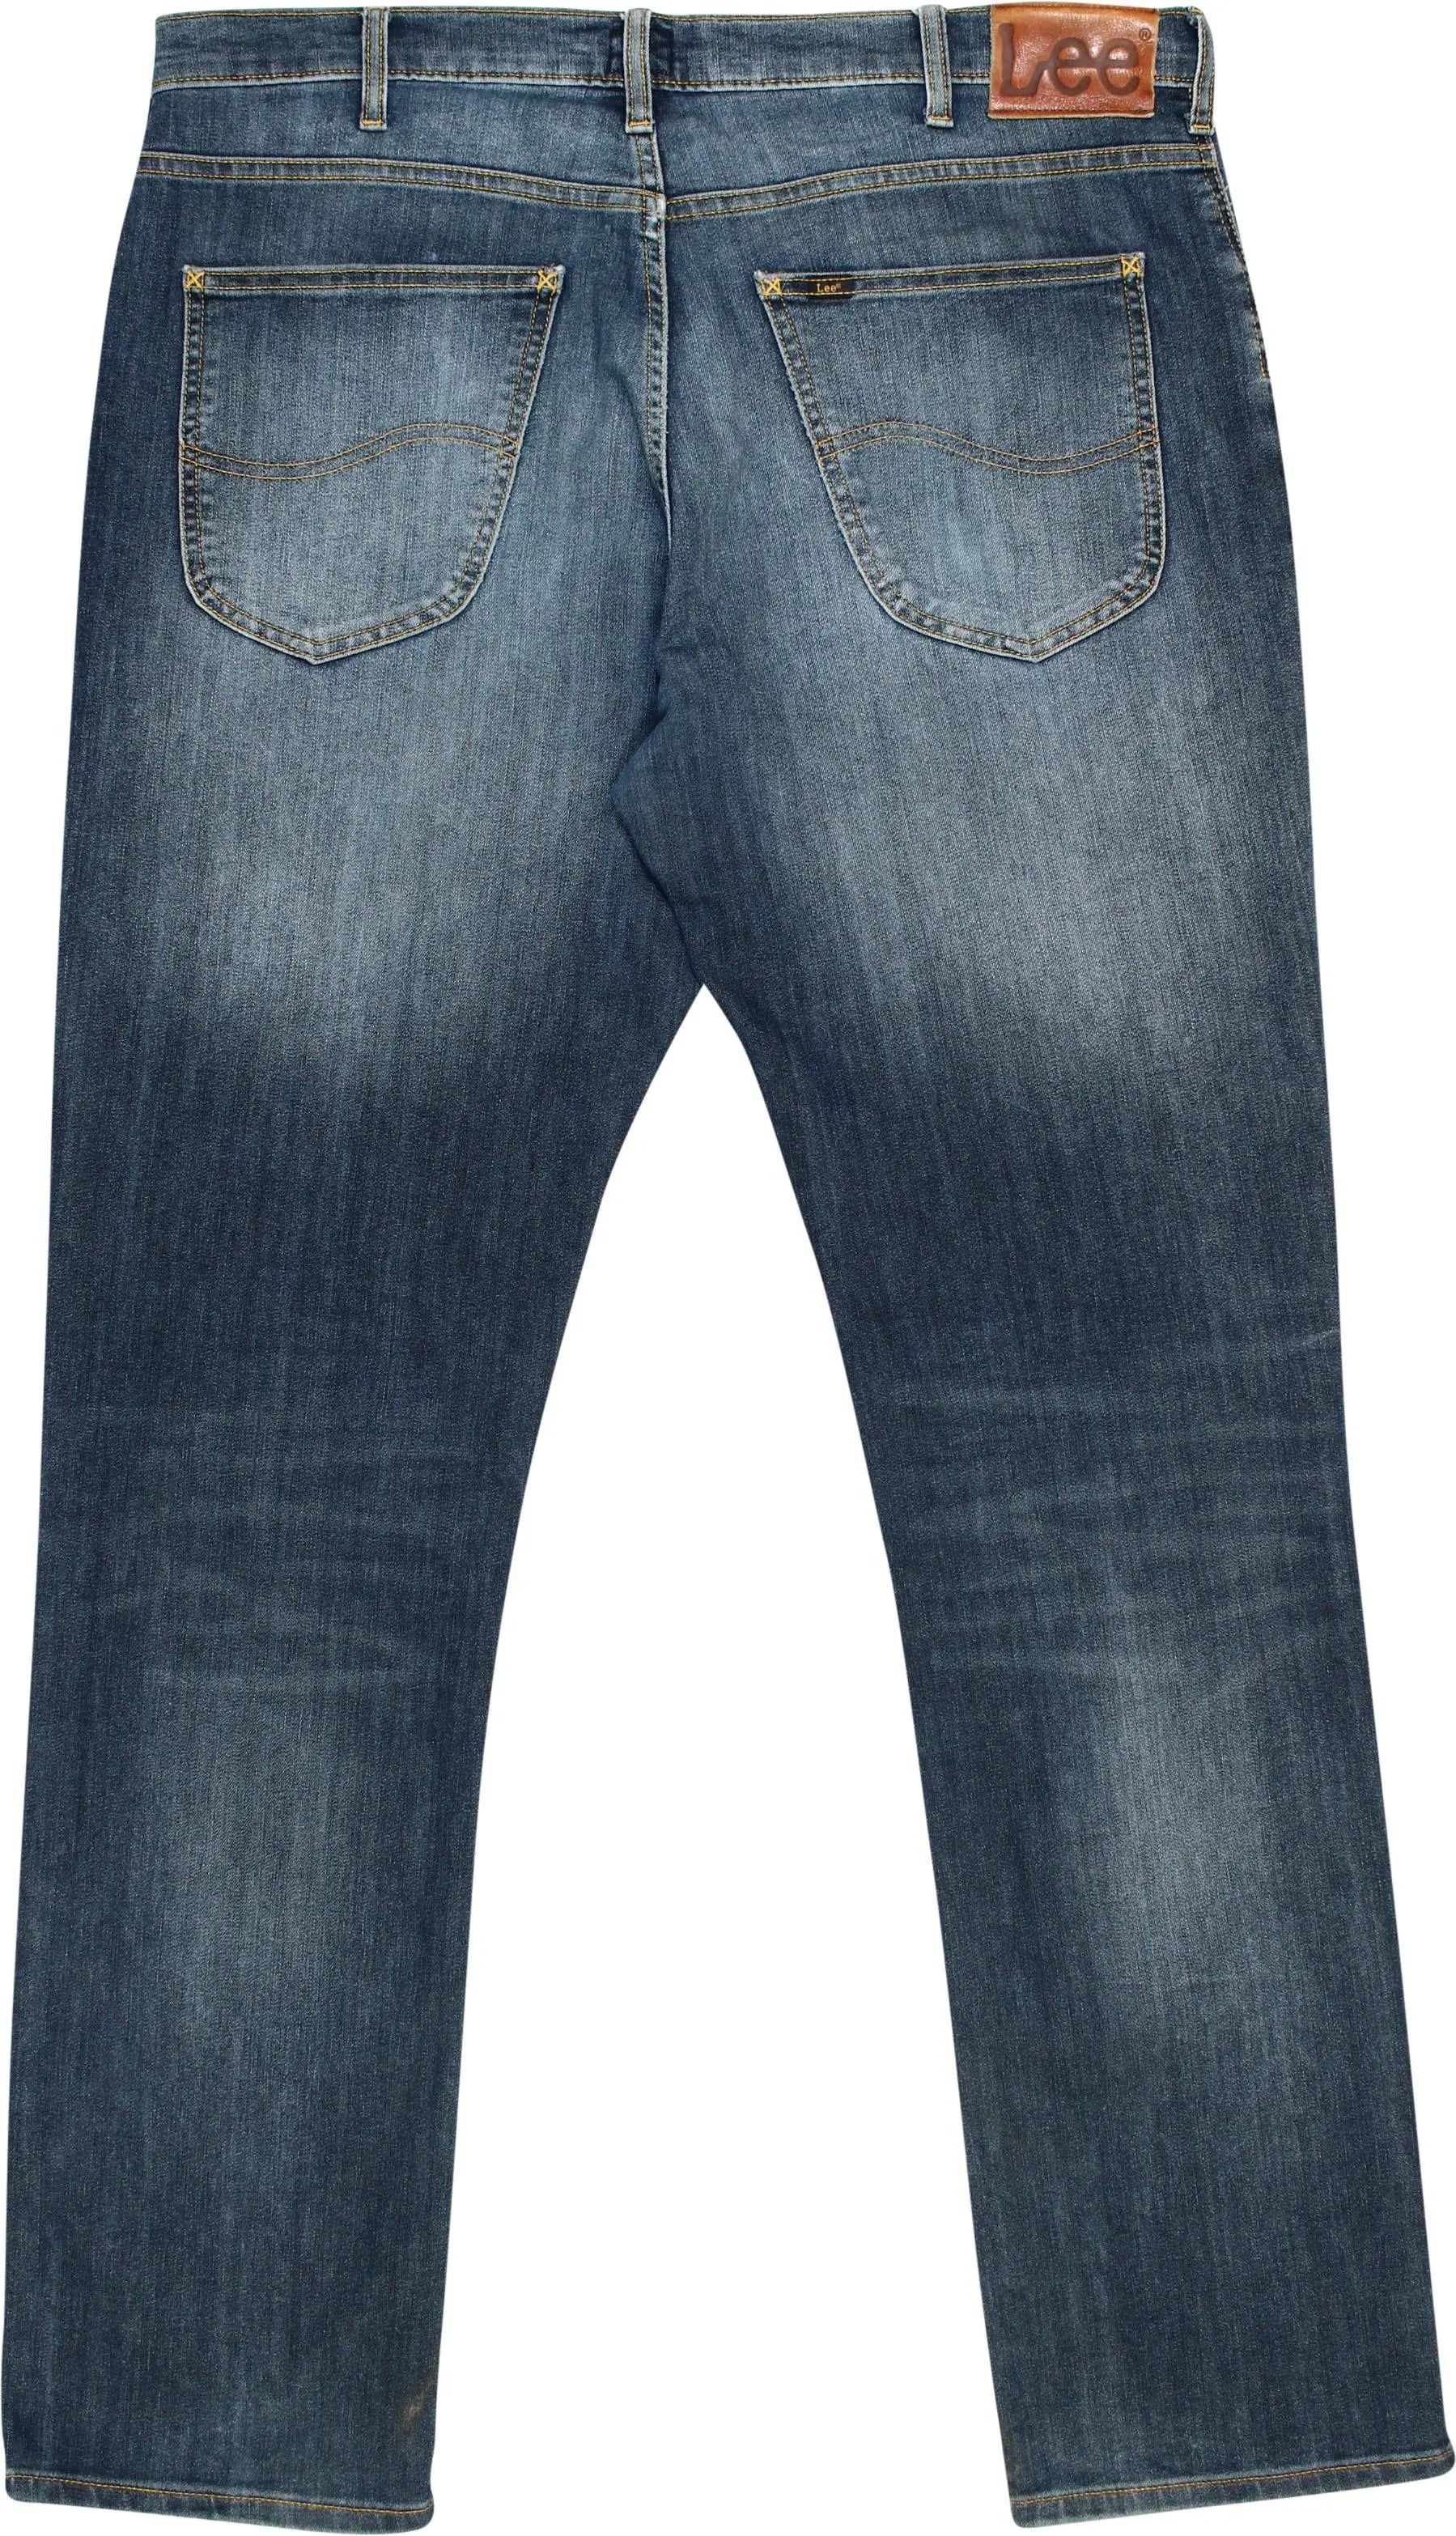 Lee - Brooklyn Jeans by Lee- ThriftTale.com - Vintage and second handclothing